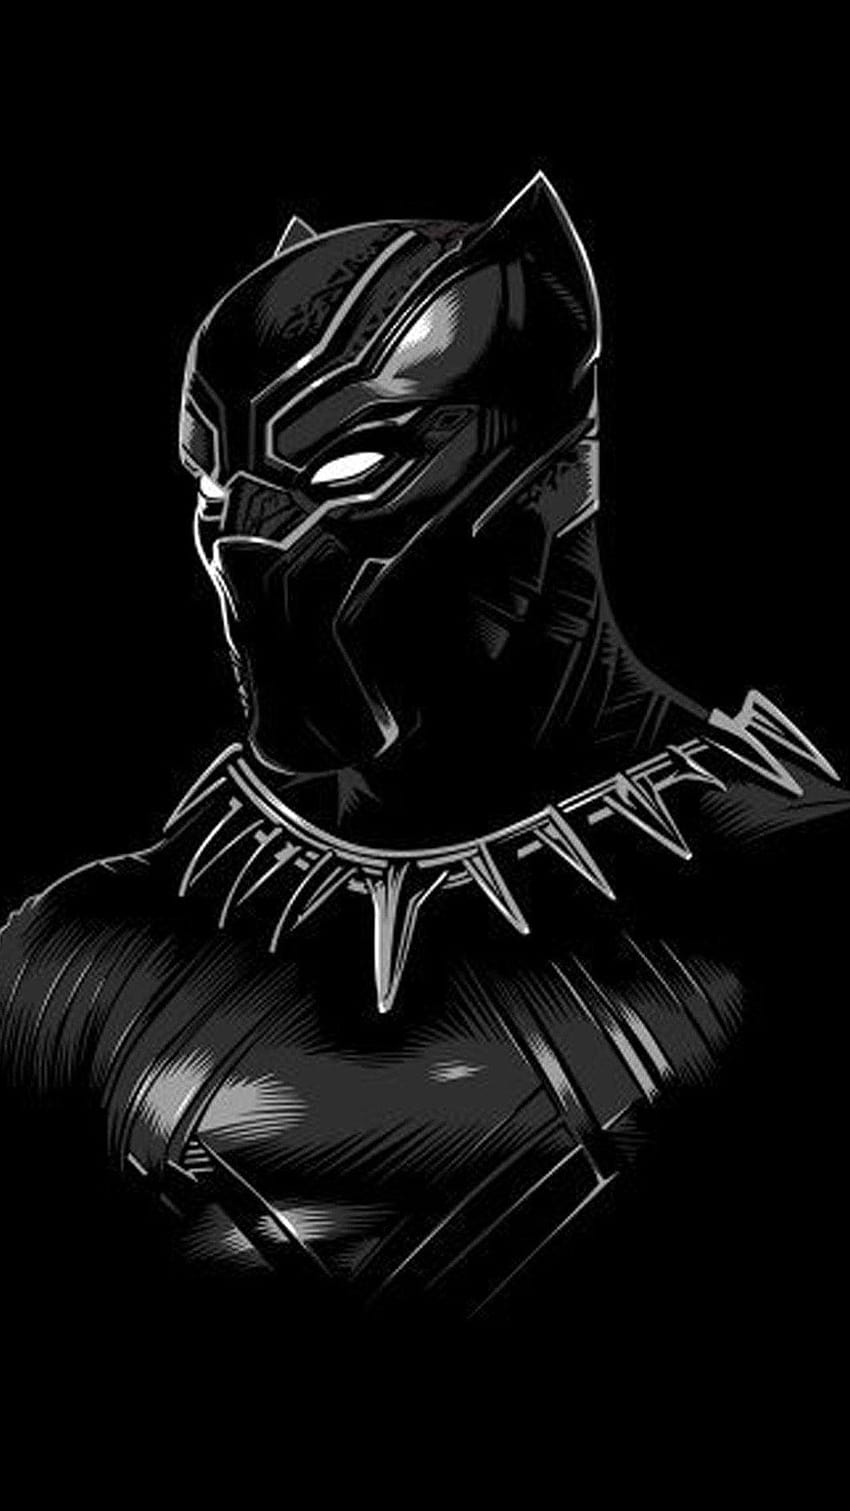 Marvel black panther mask Wallpapers Download | MobCup